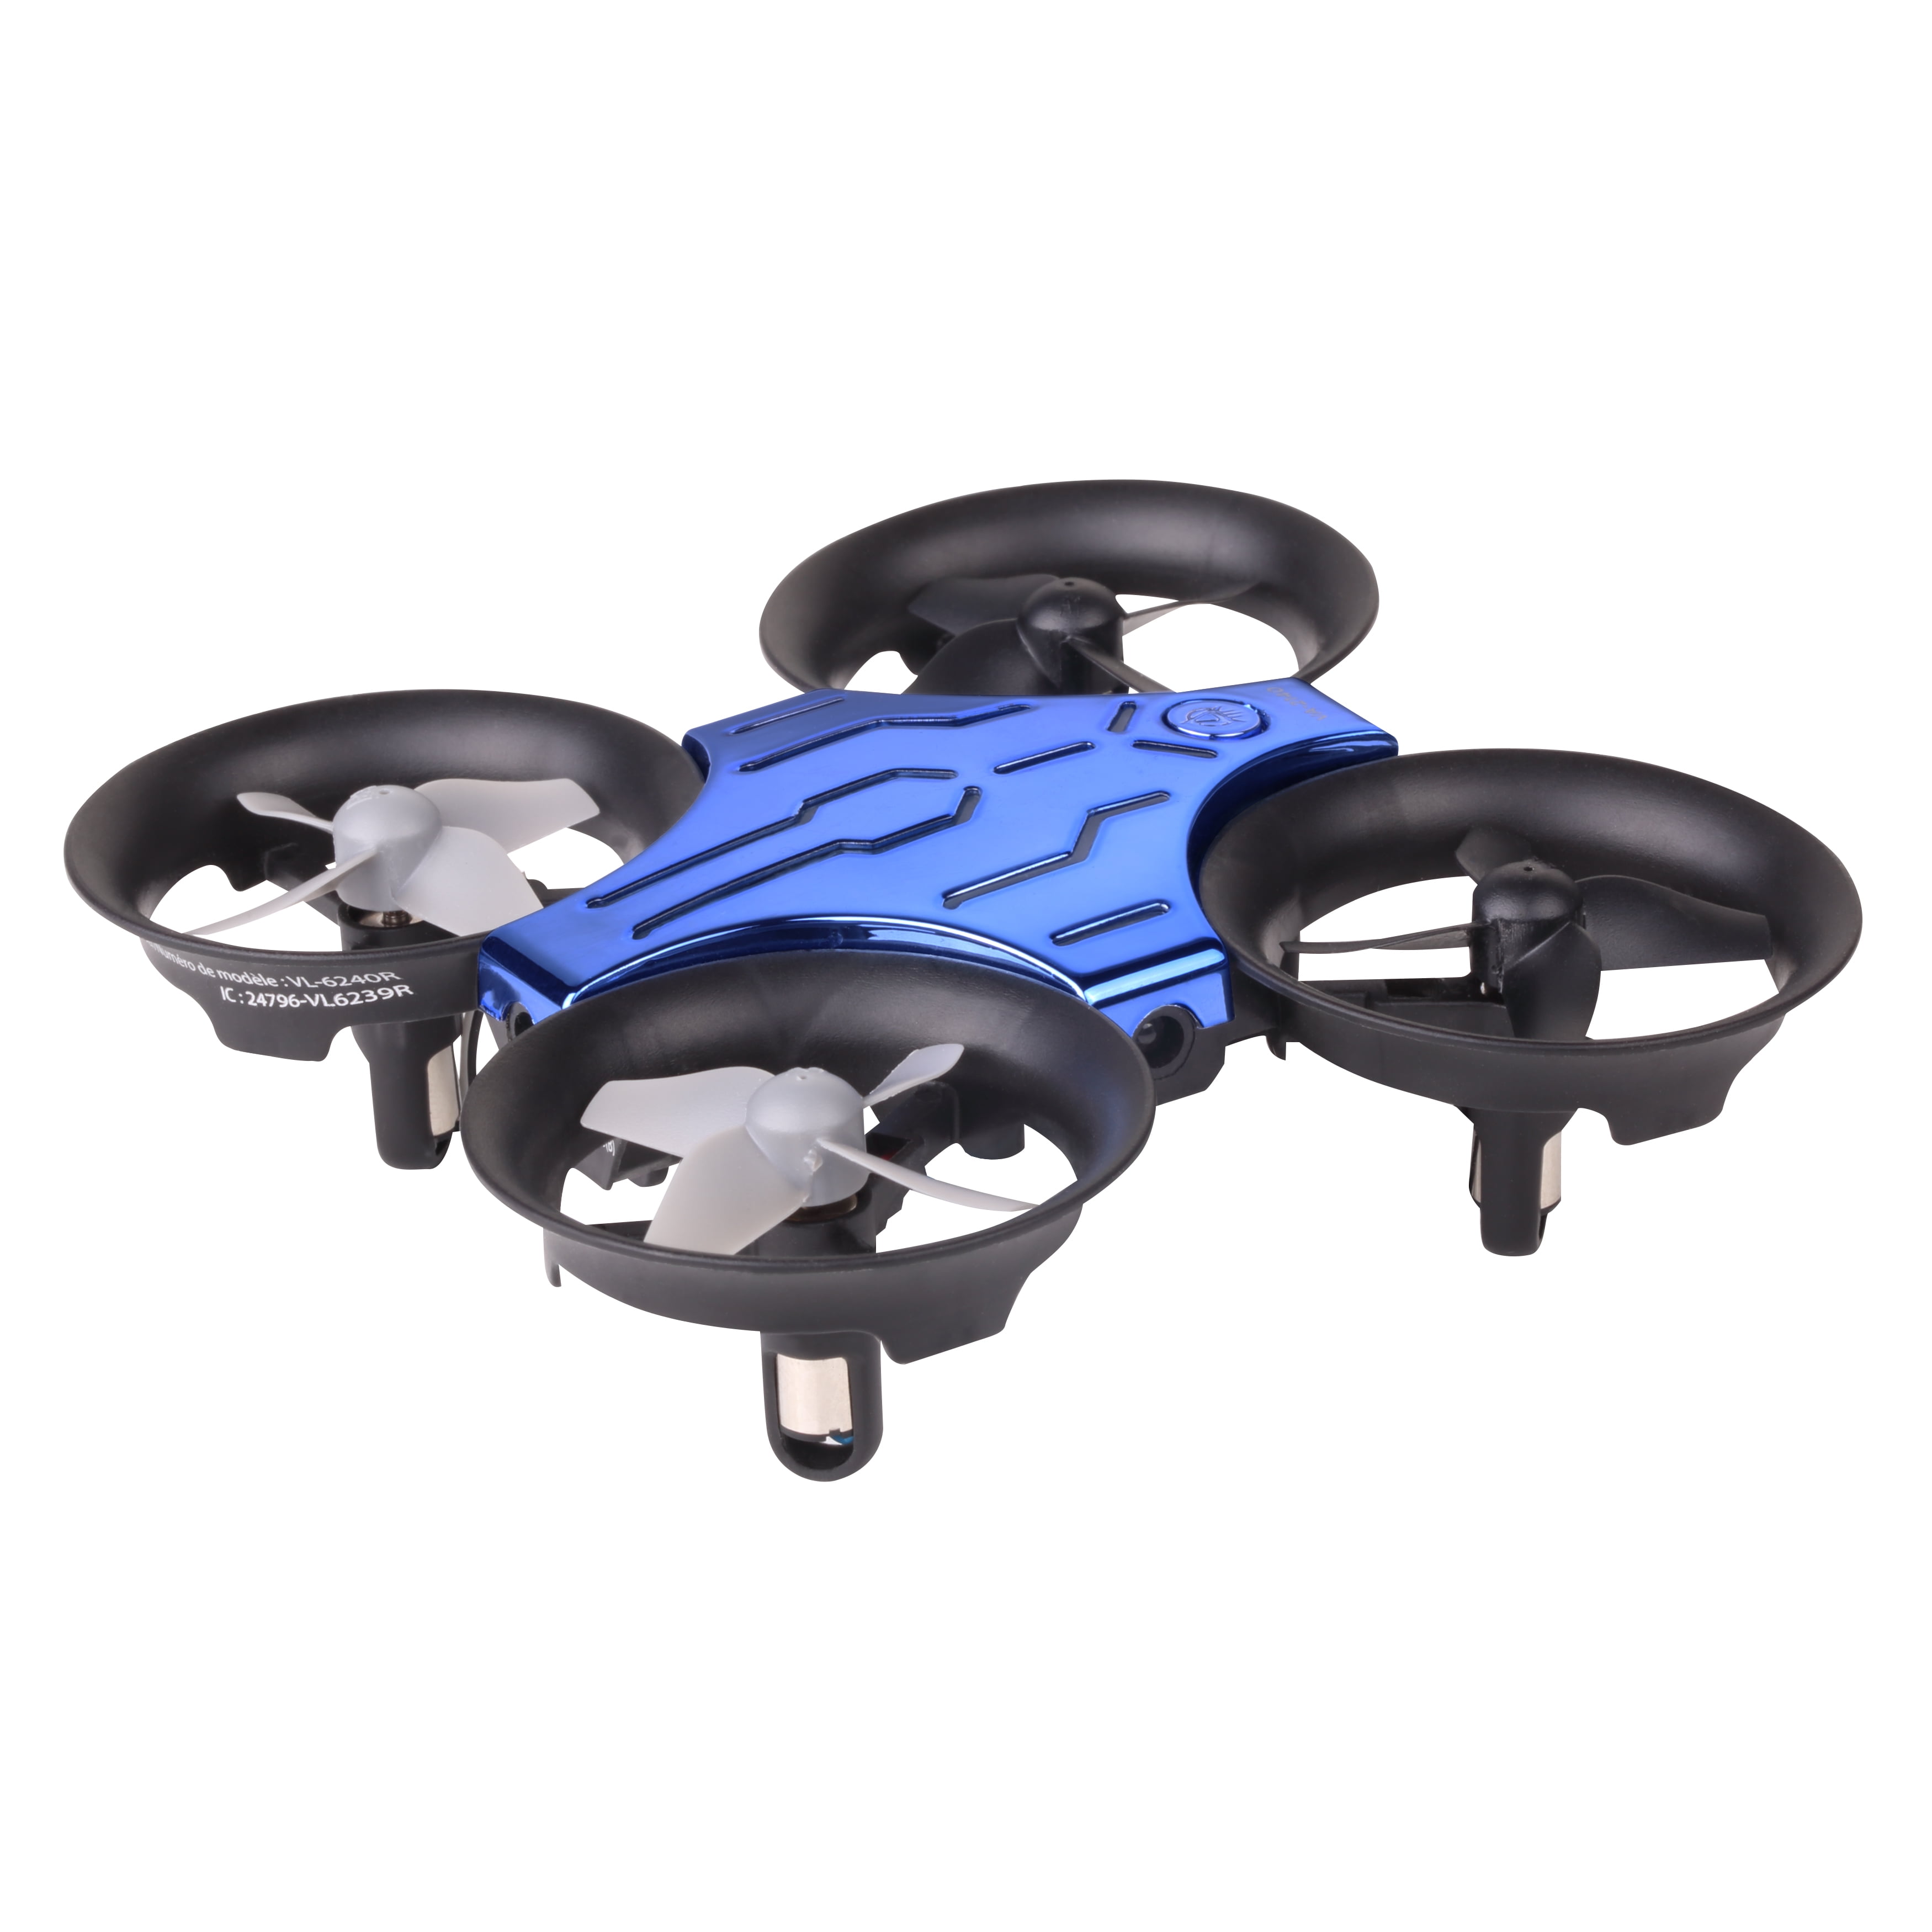 Voyage Aeronautics VA-2140 Ducted Fan Aerial Drone-Hand Gesture- Blue Color, Size 3.75 inches